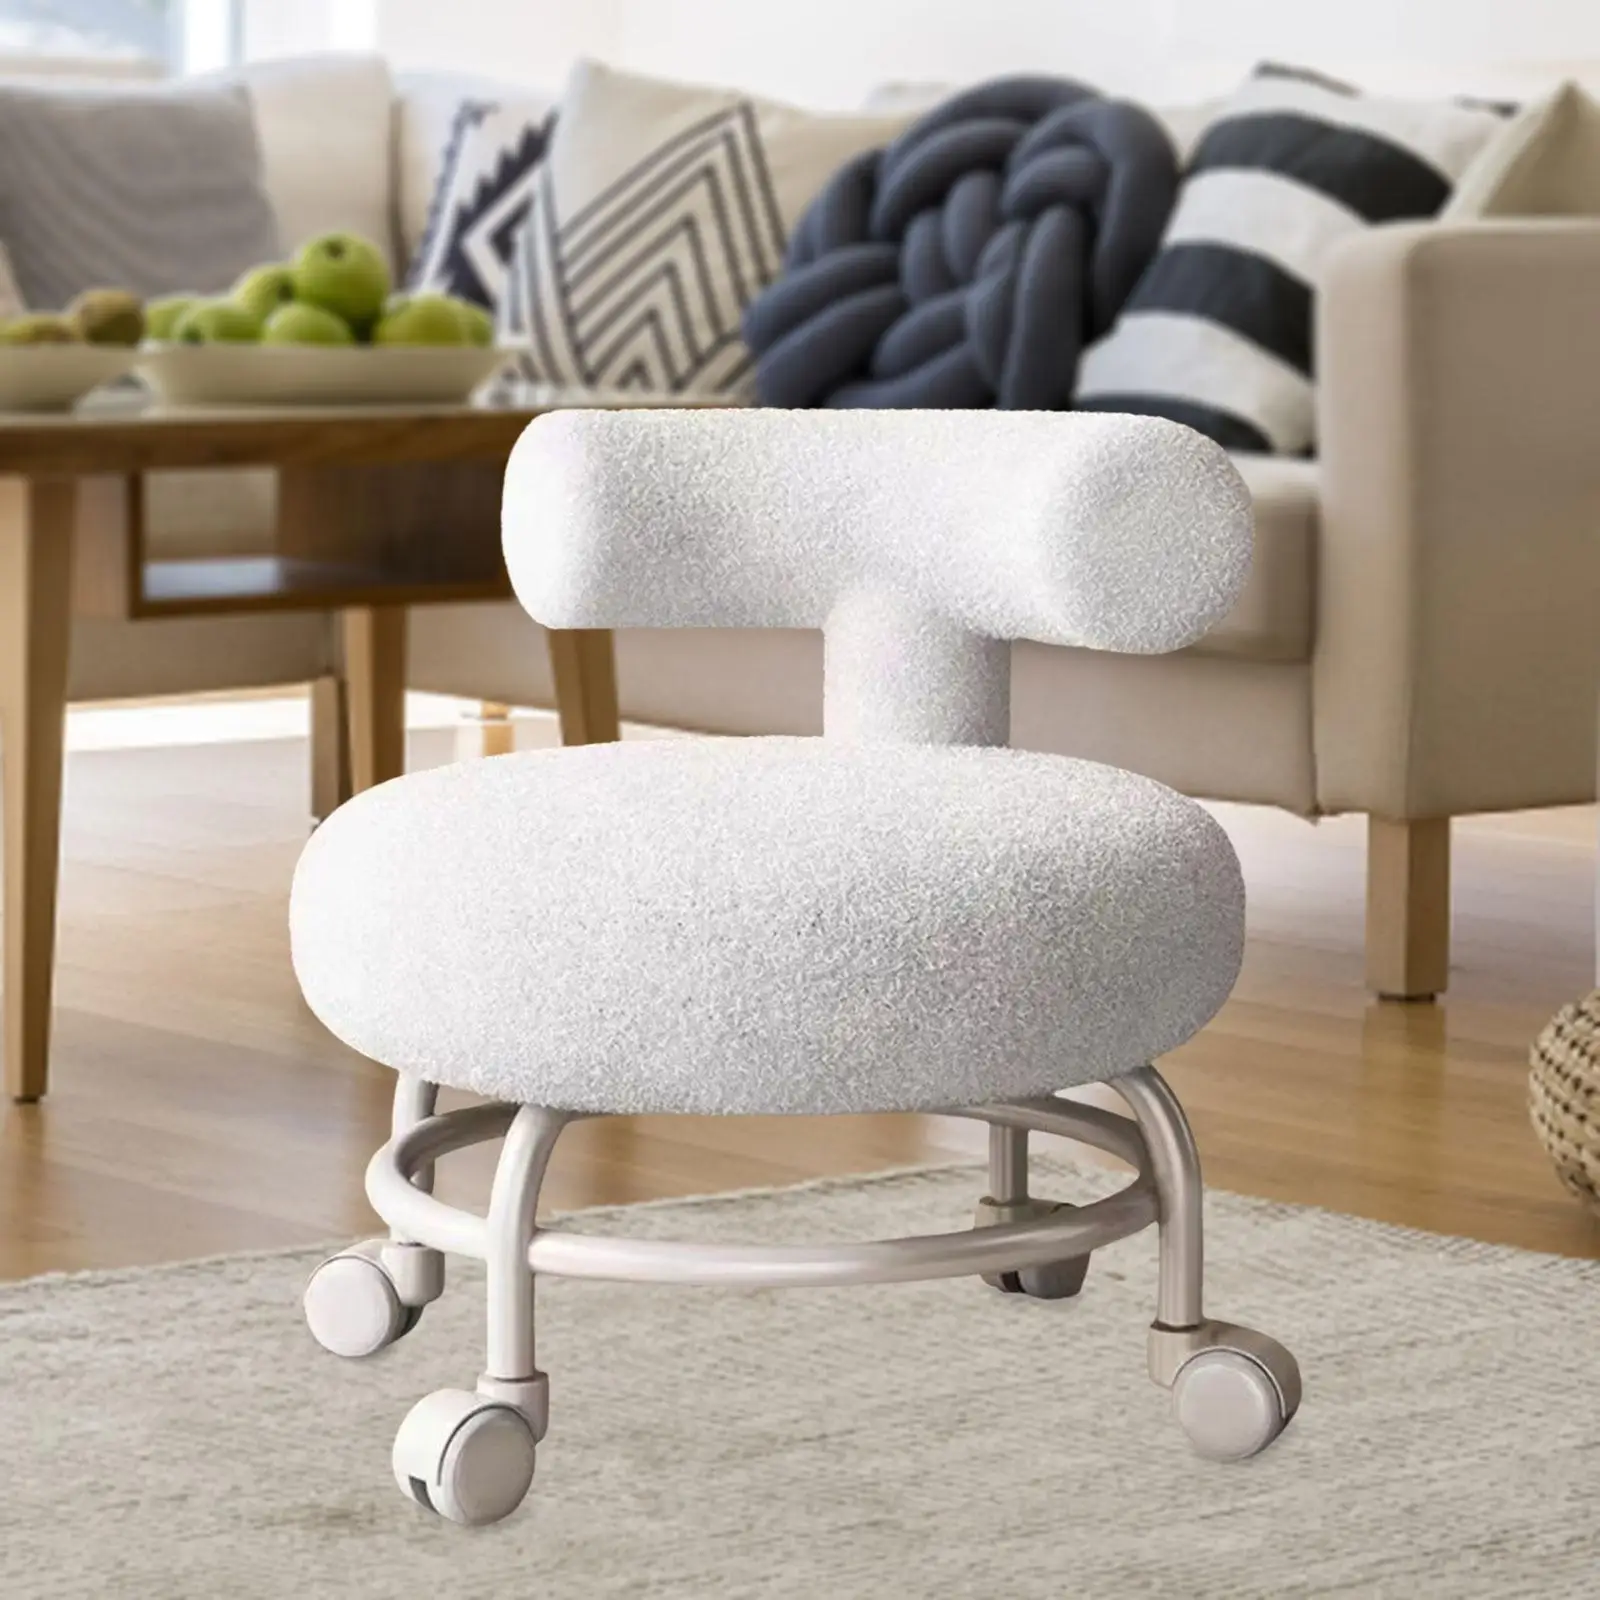 Low Round Rolling Stool with Wheels Stable Padded Seat Small Footstool Low Rolling Seat for Entryway Living Room Sturdy Doorway